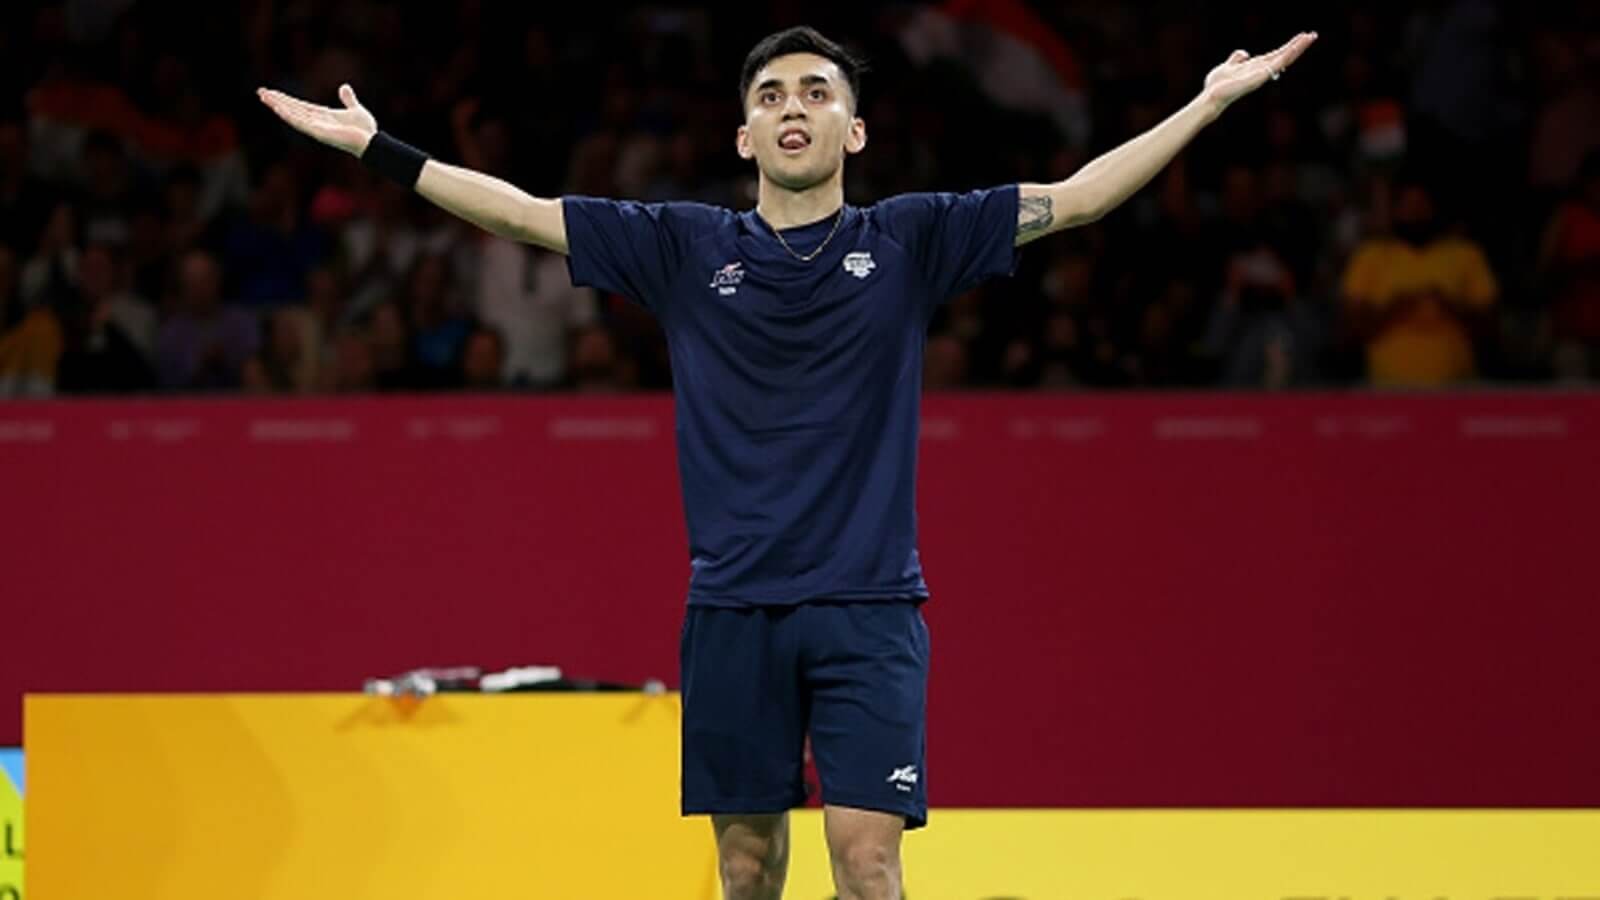 CWG 2022: Lakshya Sen bags 57th medal, wins gold for India